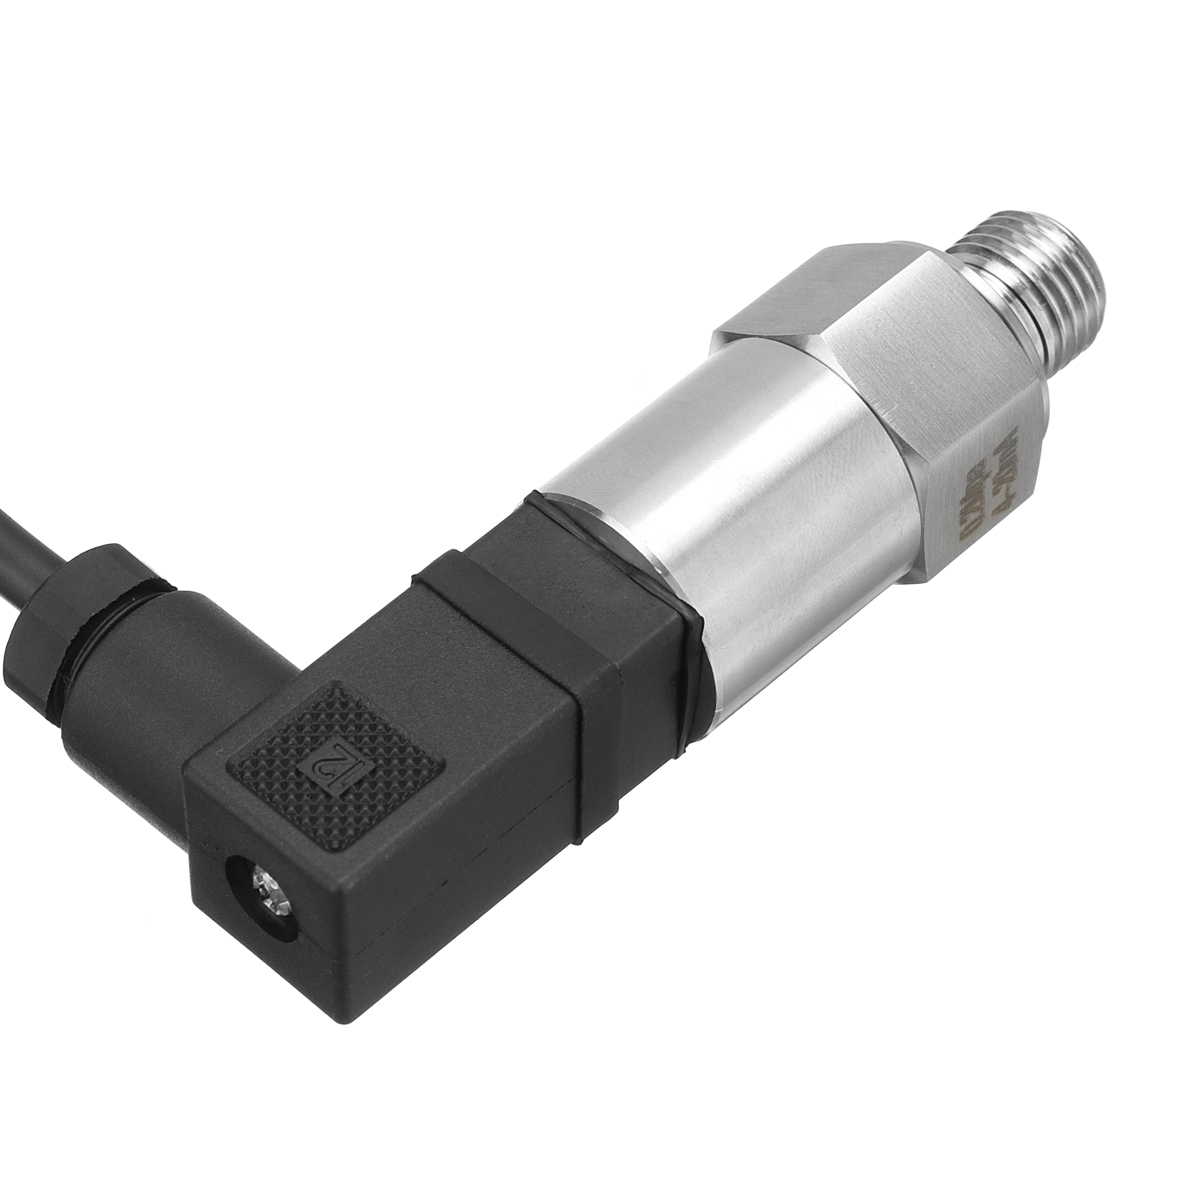 0-1.6MPA G1/4 Pressure Transmitter Transducer 4-20Ma Output for Water Gas Oil - Auto GoShop